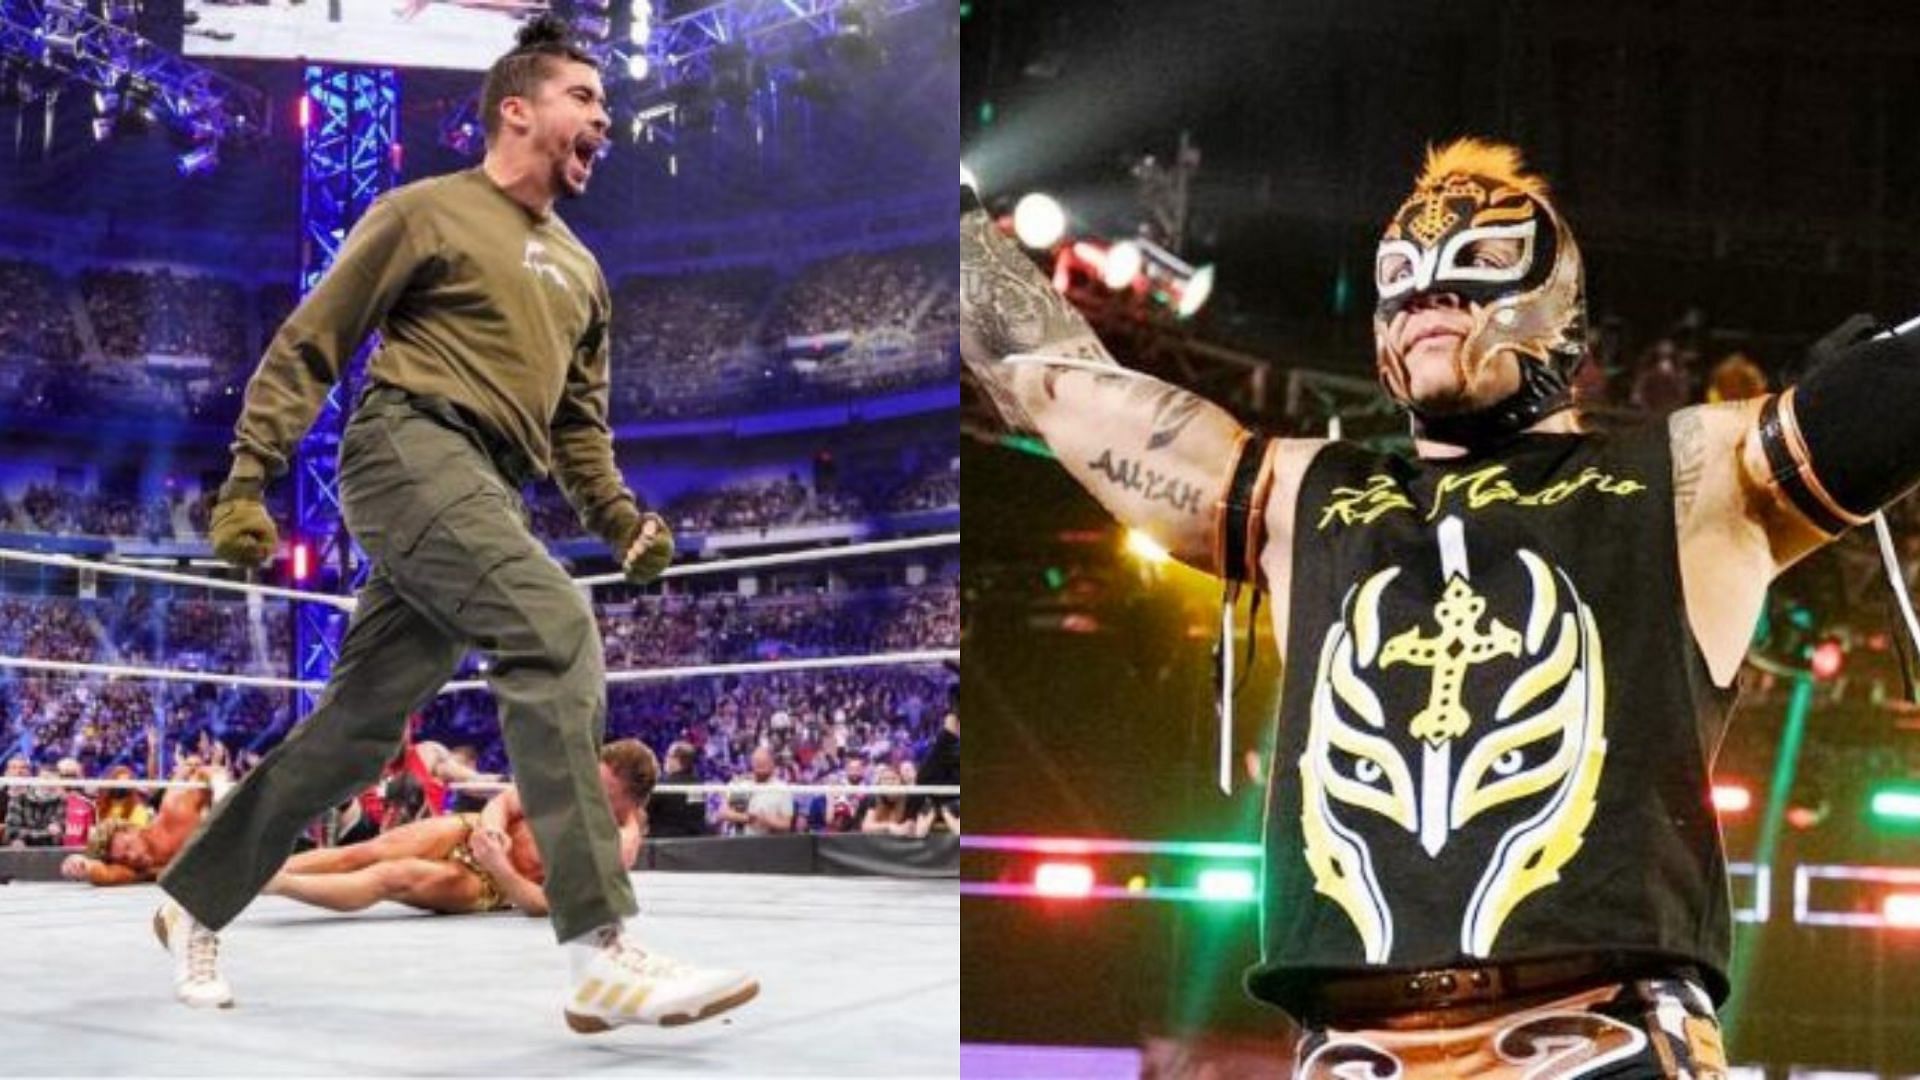 Bad Bunny and Rey Mysterio shared a heartfelt moment at the Royal Rumble